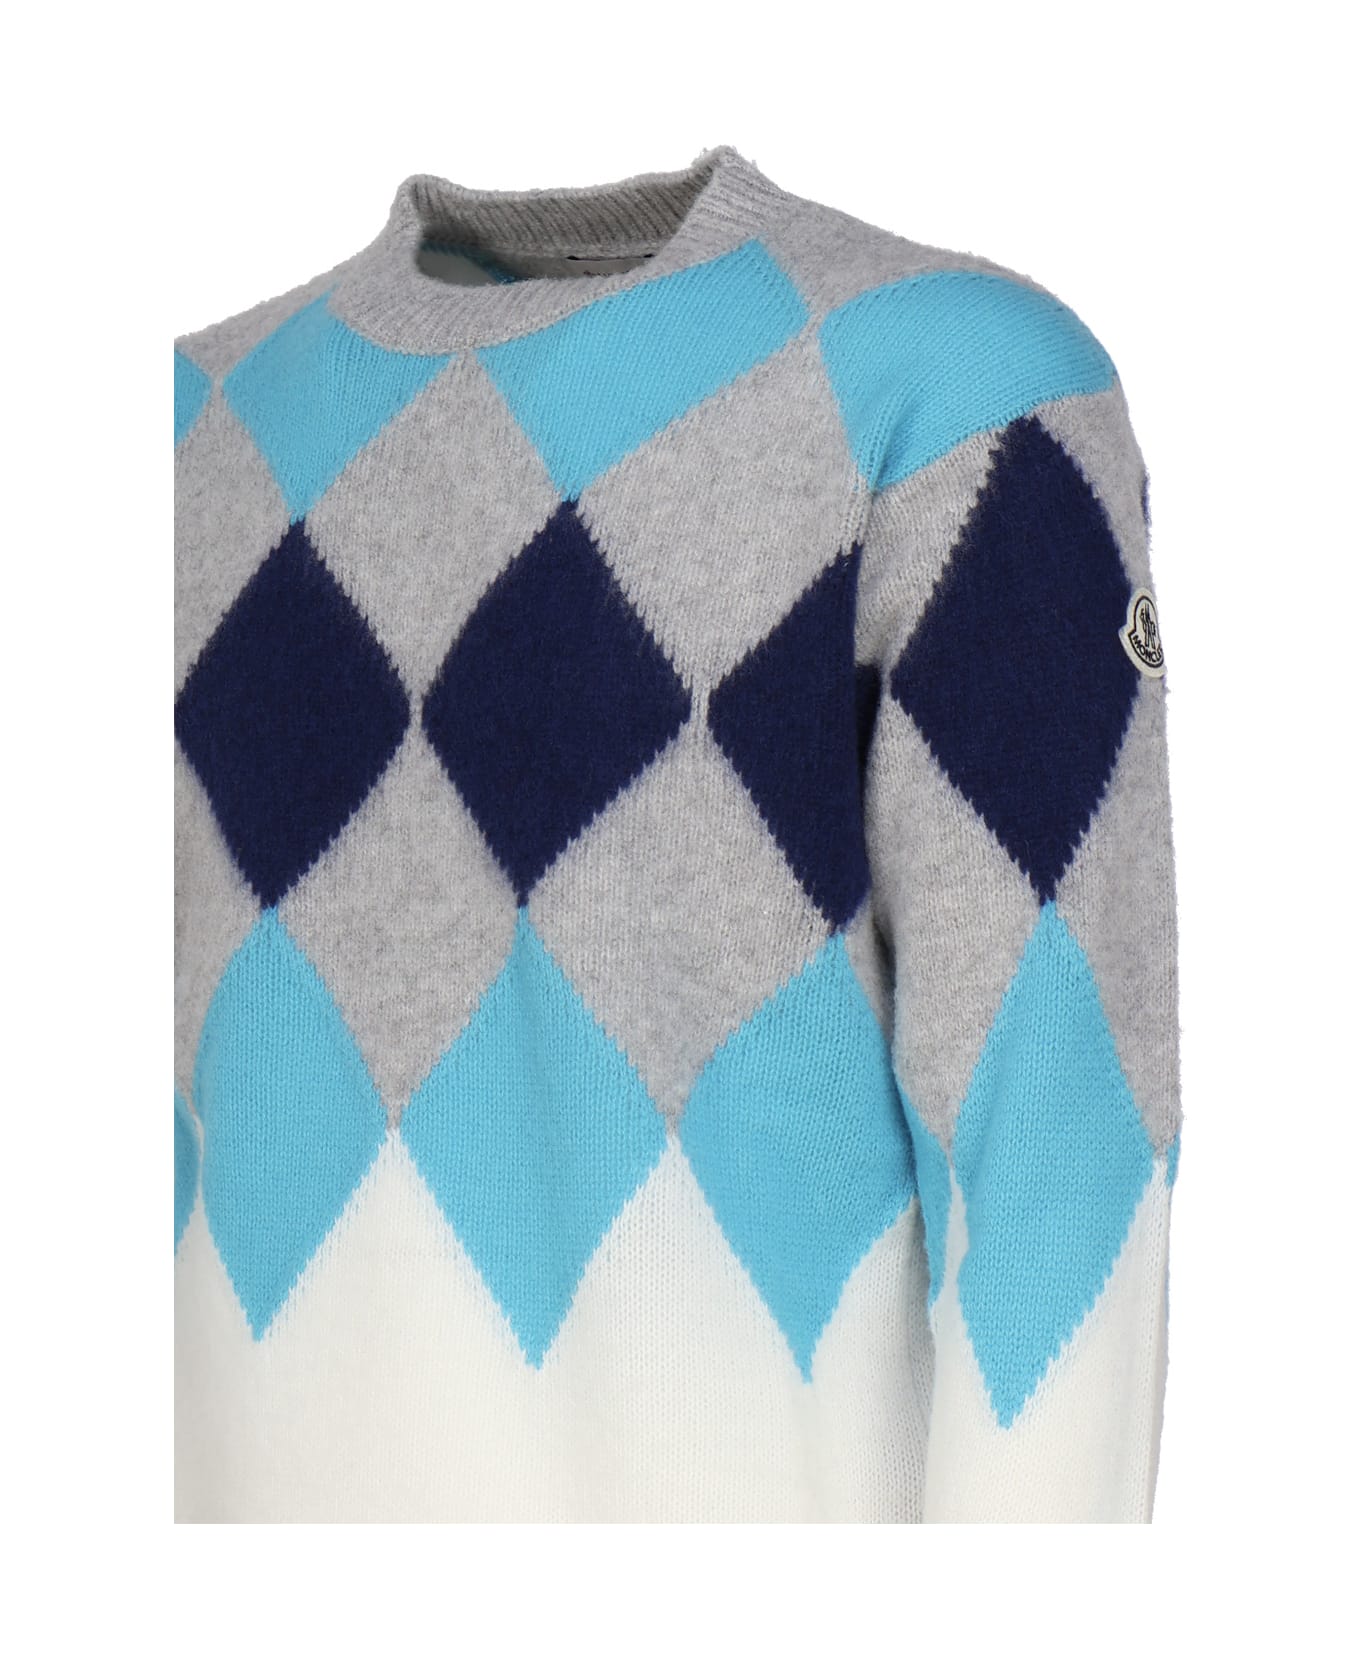 Moncler Argyle Sweater In Wool And Cashmere - White, grey, light blue ニットウェア